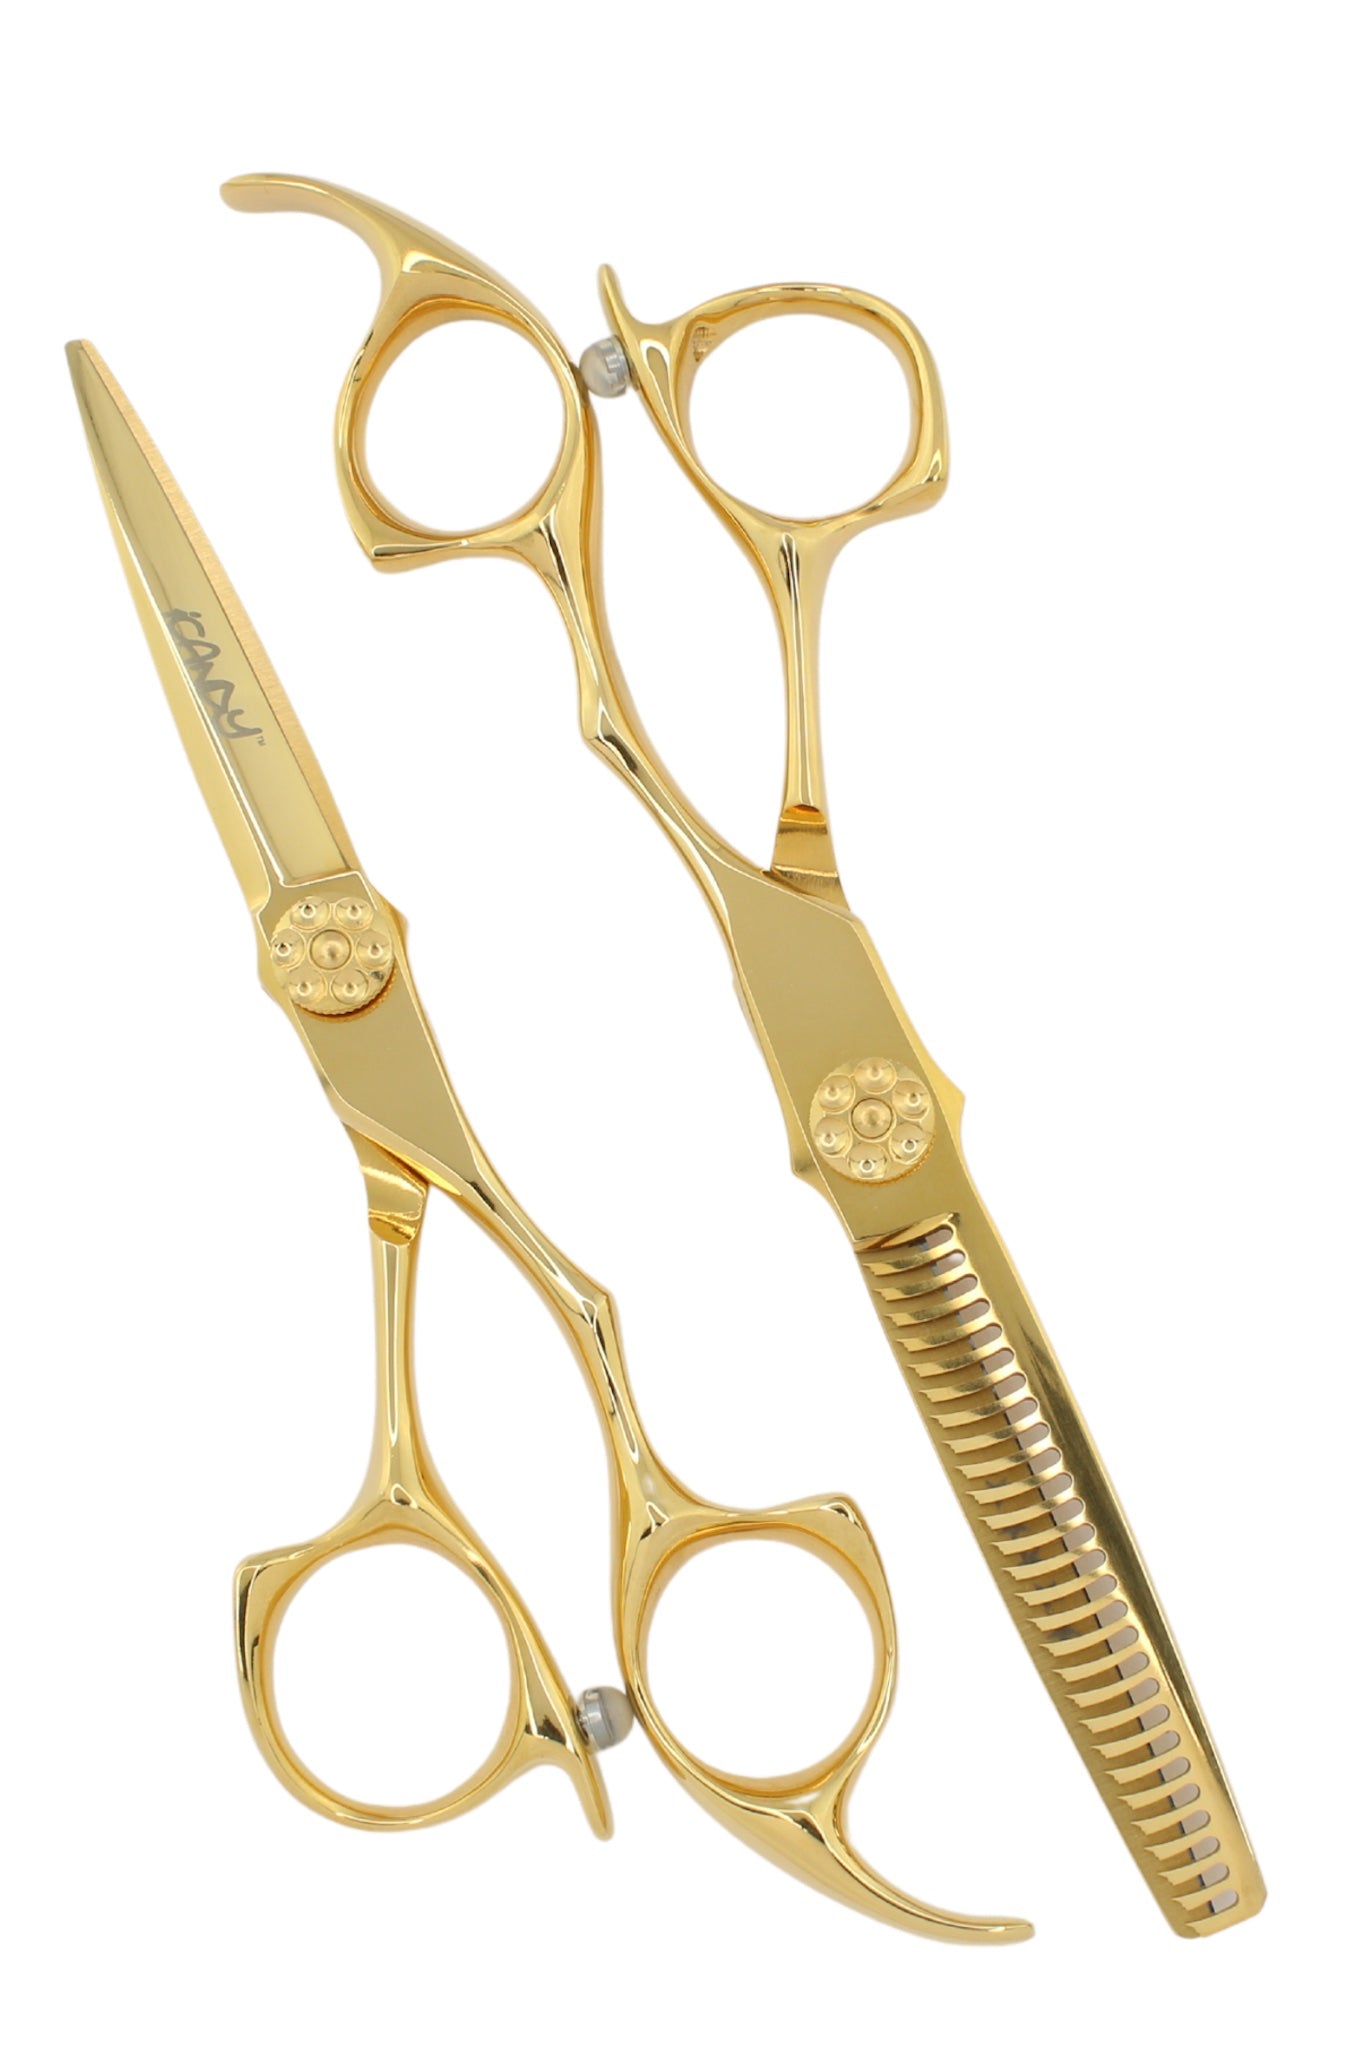 iCandy ALL STAR Yellow Gold Scissor-Thinner Bundle 5.5/6.0 inch 